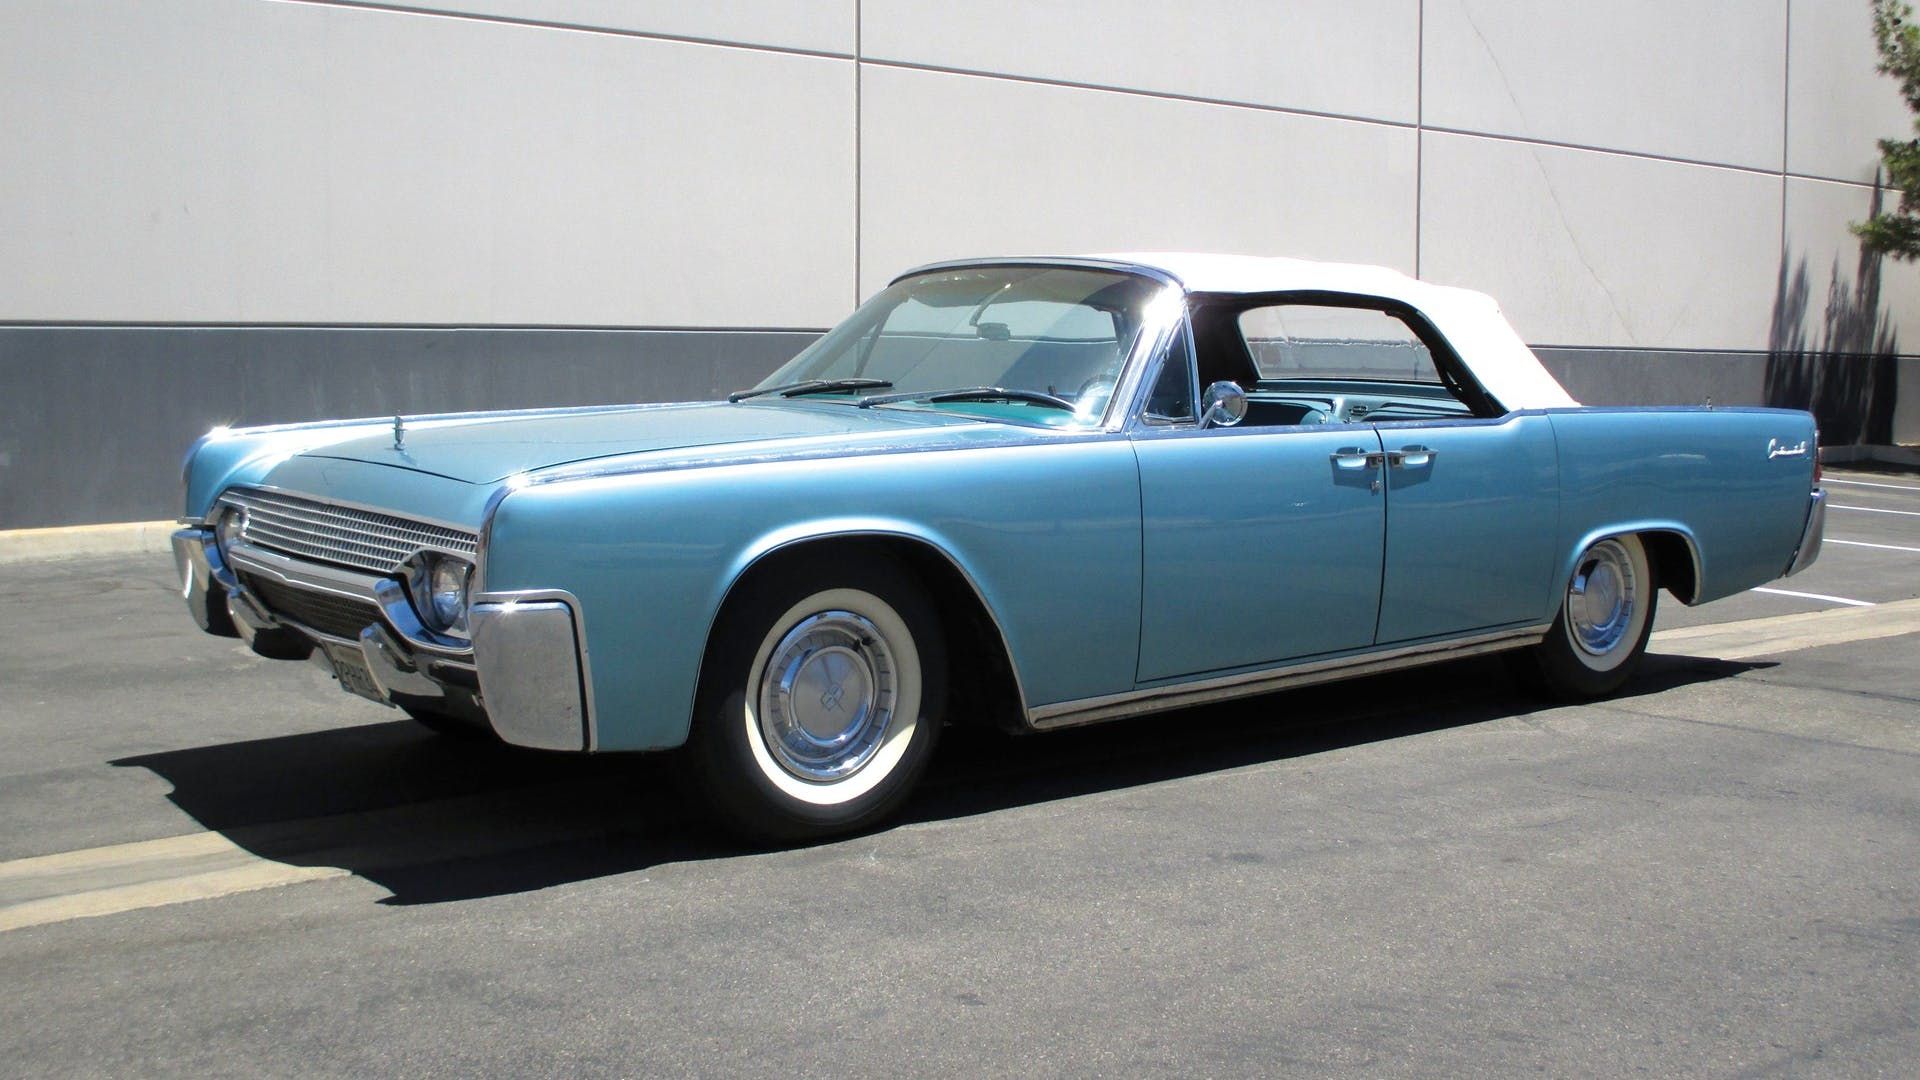 Blue 1961 Lincoln Continental Parked Outside